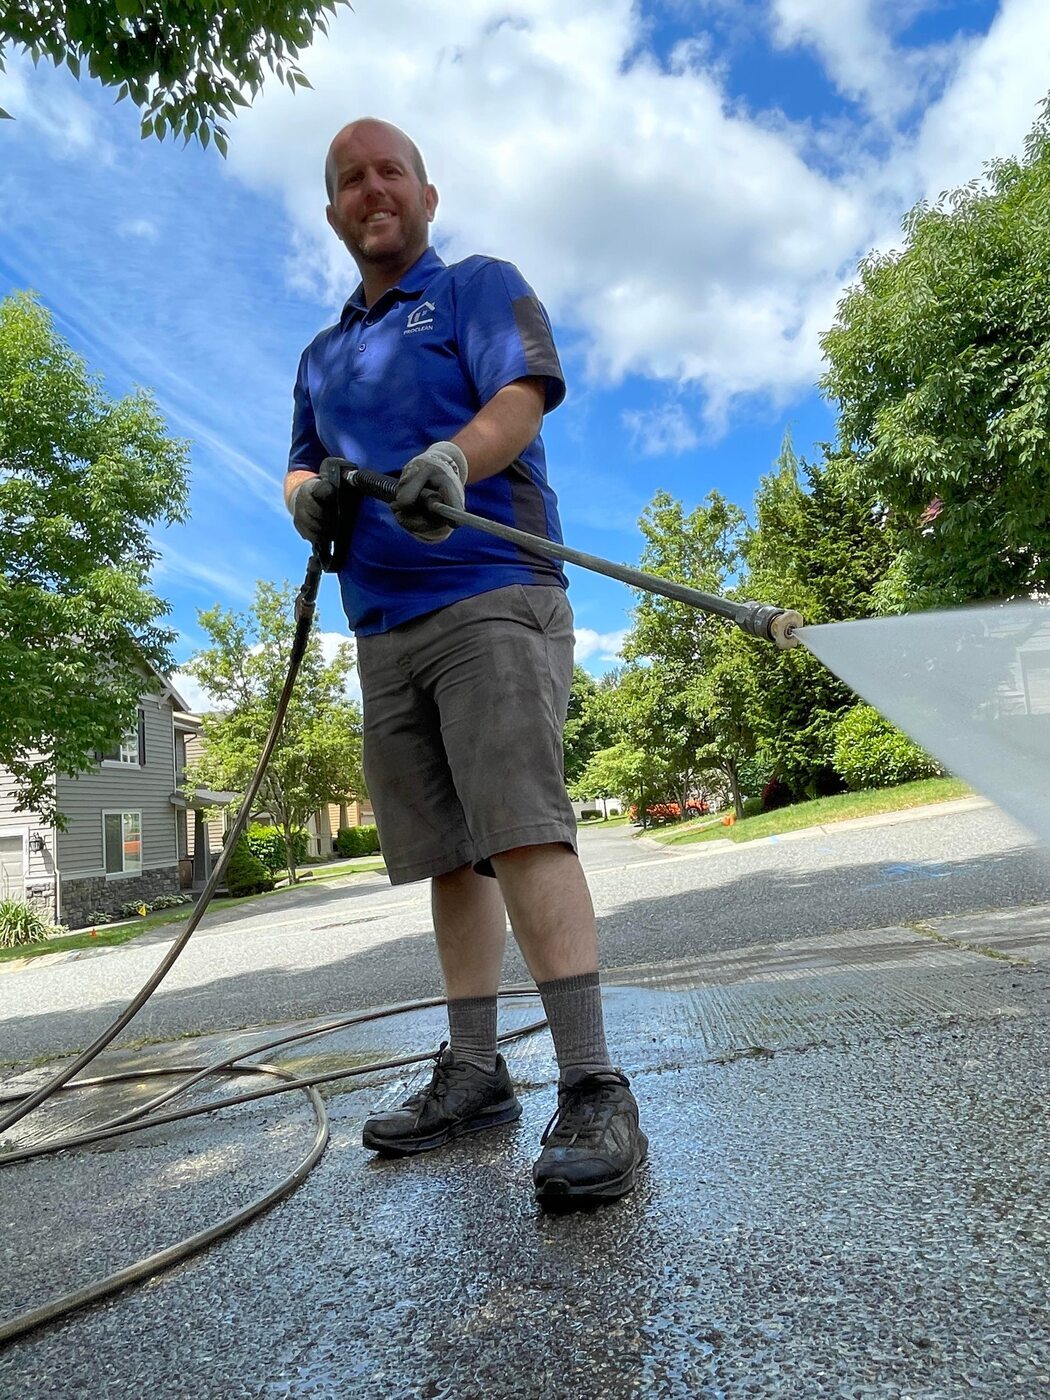 The ProClean Team is a professional cleaning company started in 2009. The company offers gutter cleaning, house washing, pressure washing, roof cleaning, window cleaning, gutter cleaning, and Christmas lighting installation services